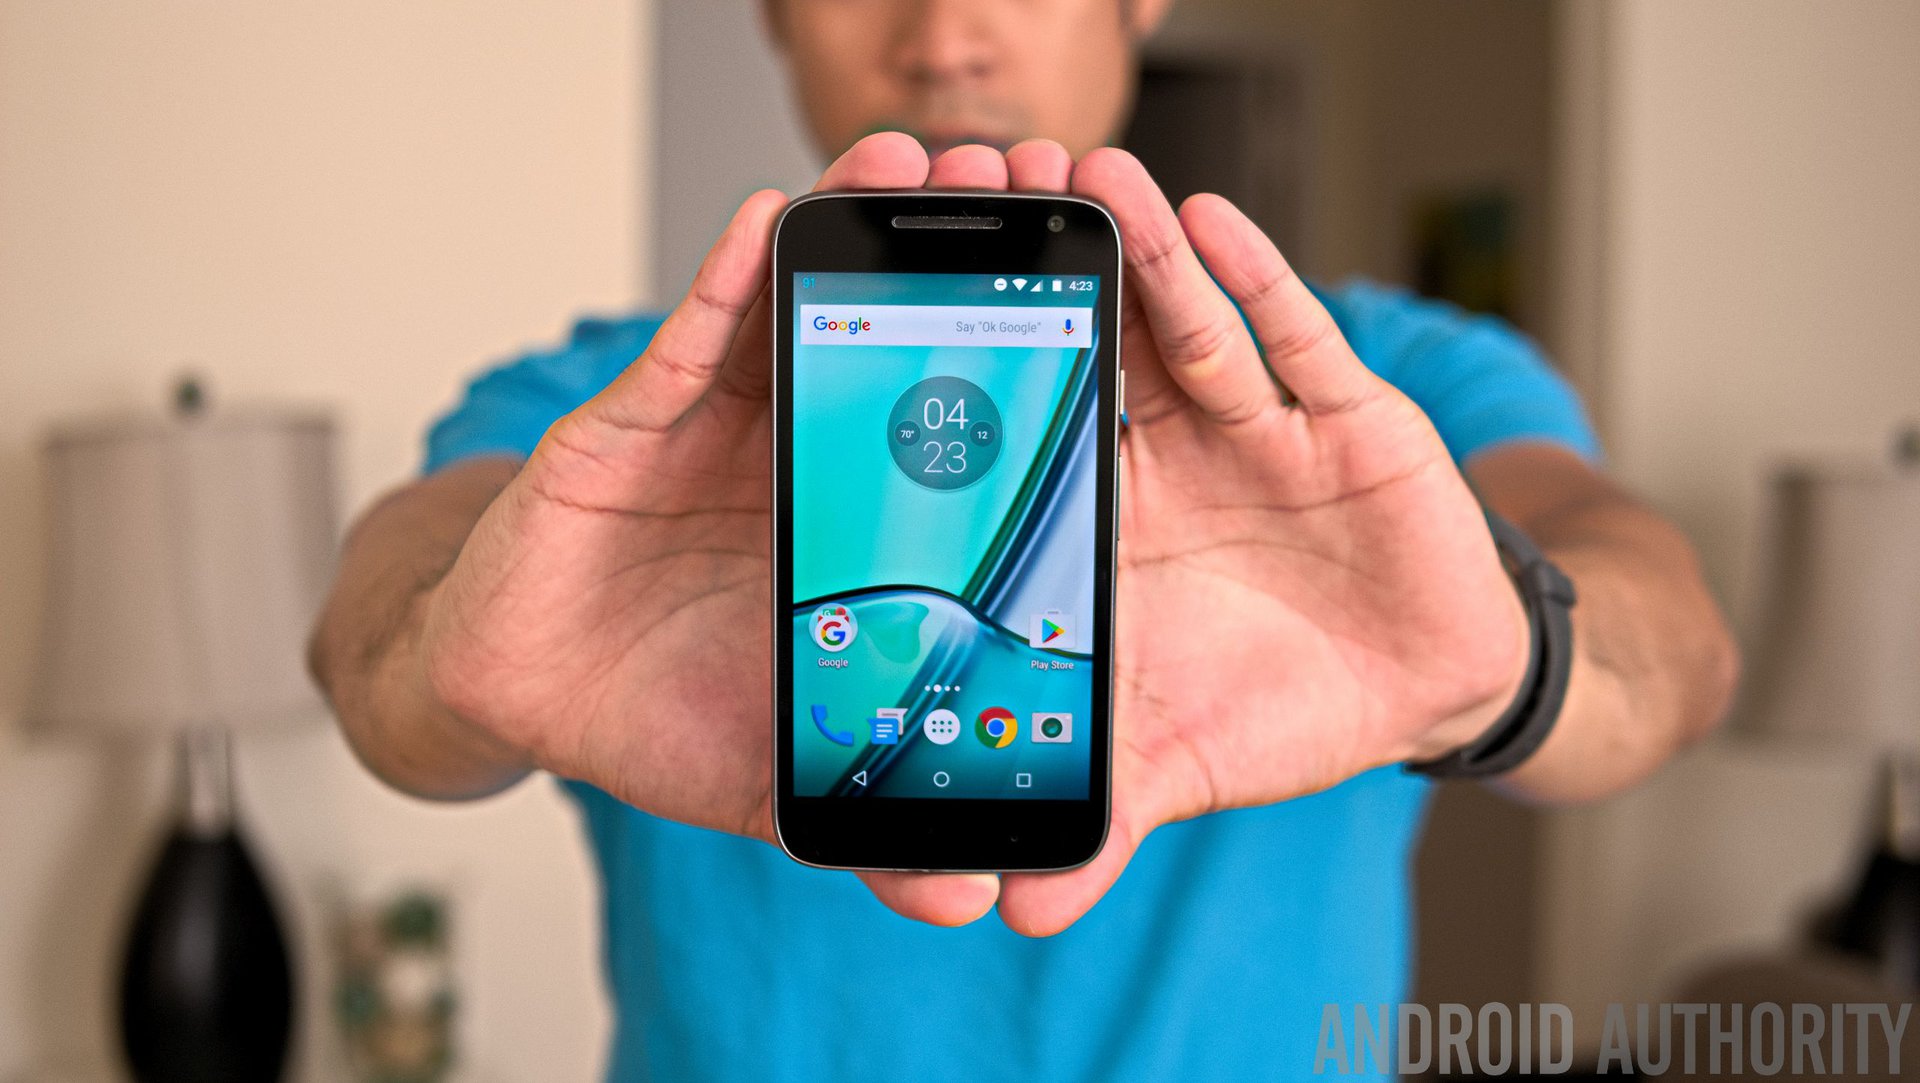 Moto G4 Play: Good, old and simple